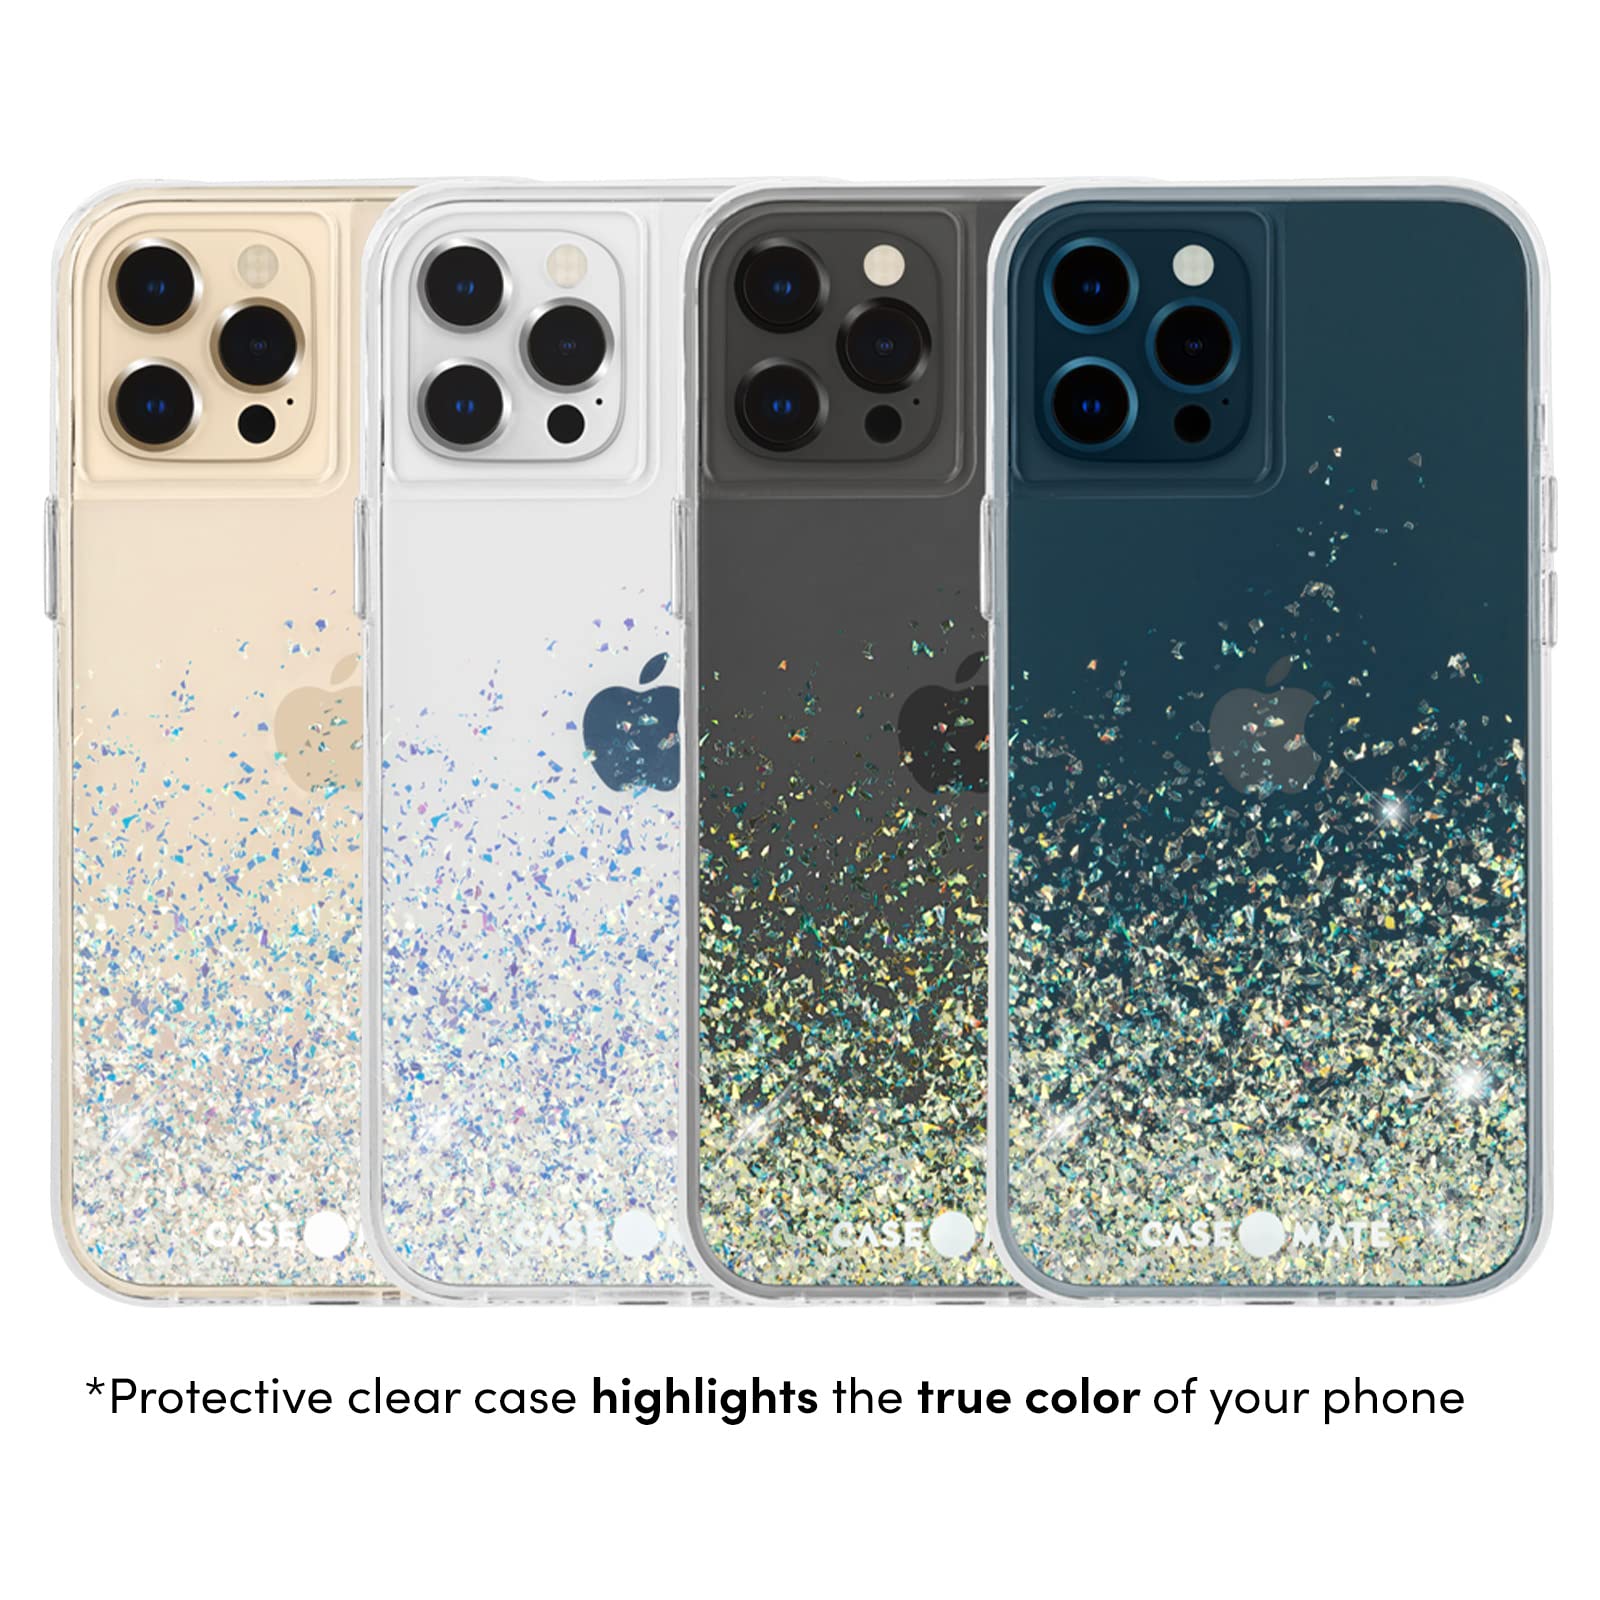 Case-Mate - TWINKLE OMBRE - Case for iPhone 12 Pro Max (5G) - 10 ft Drop Protection - 6.7 Inch - Stardust